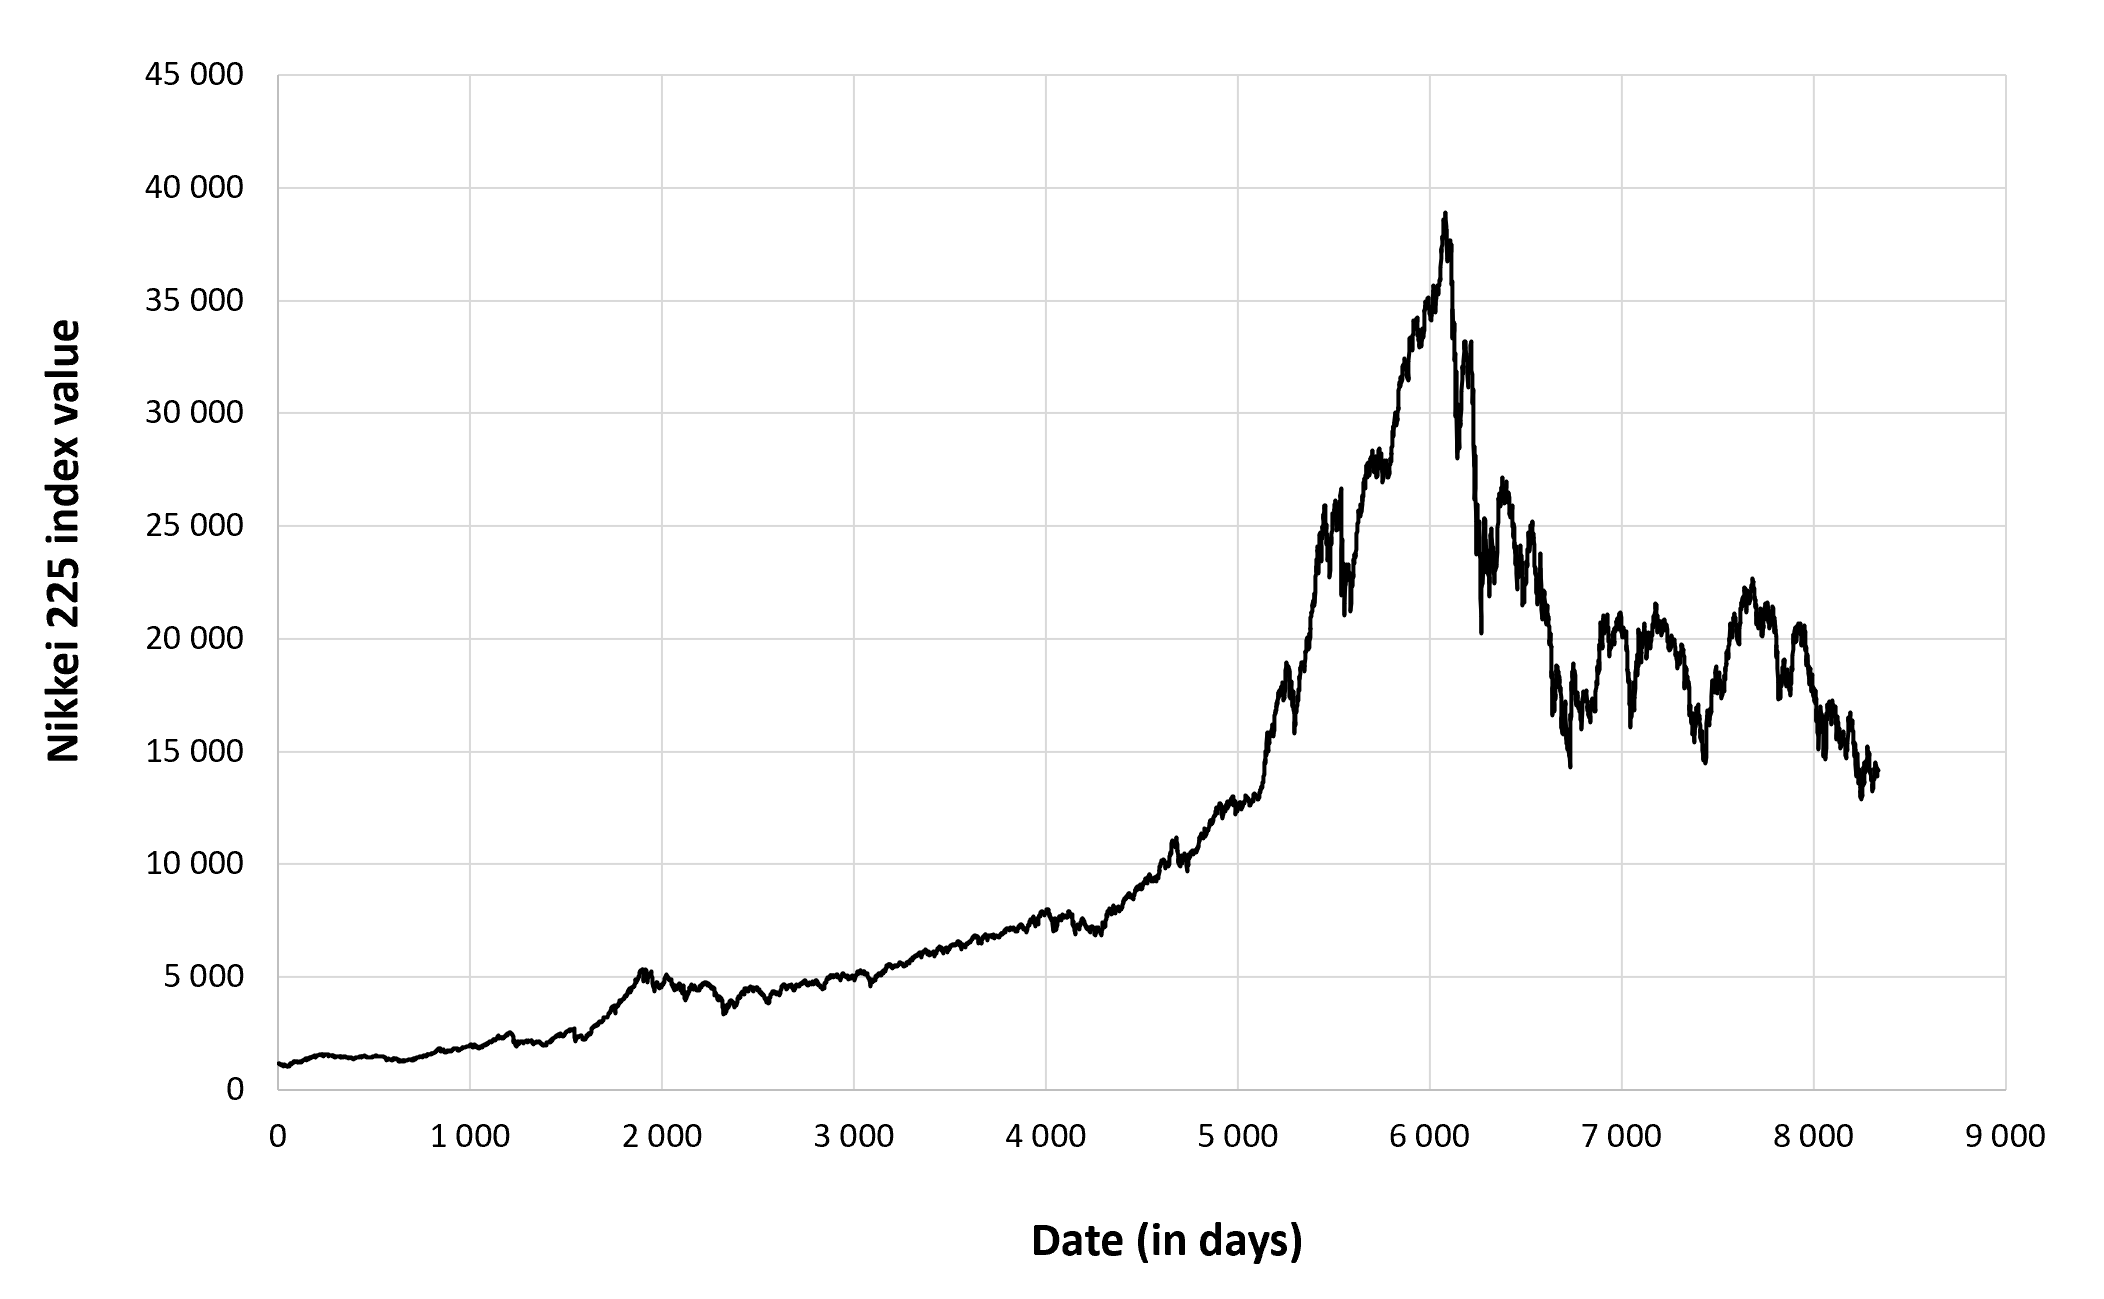 Evolution of the Nikkei 225 index